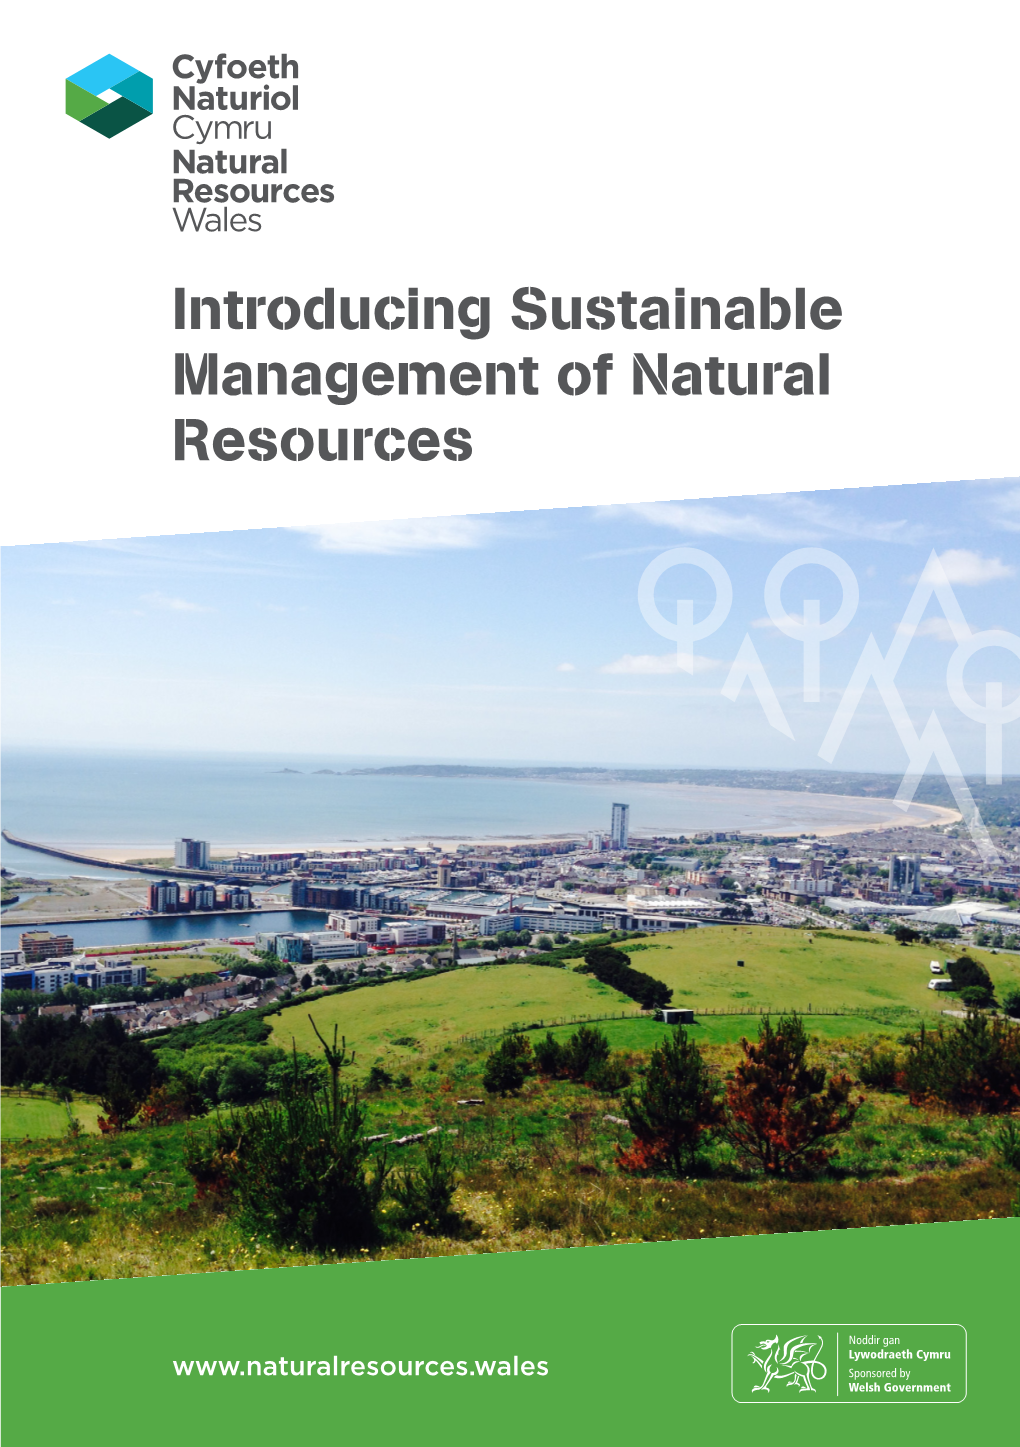 Introducing Sustainable Management of Natural Resources